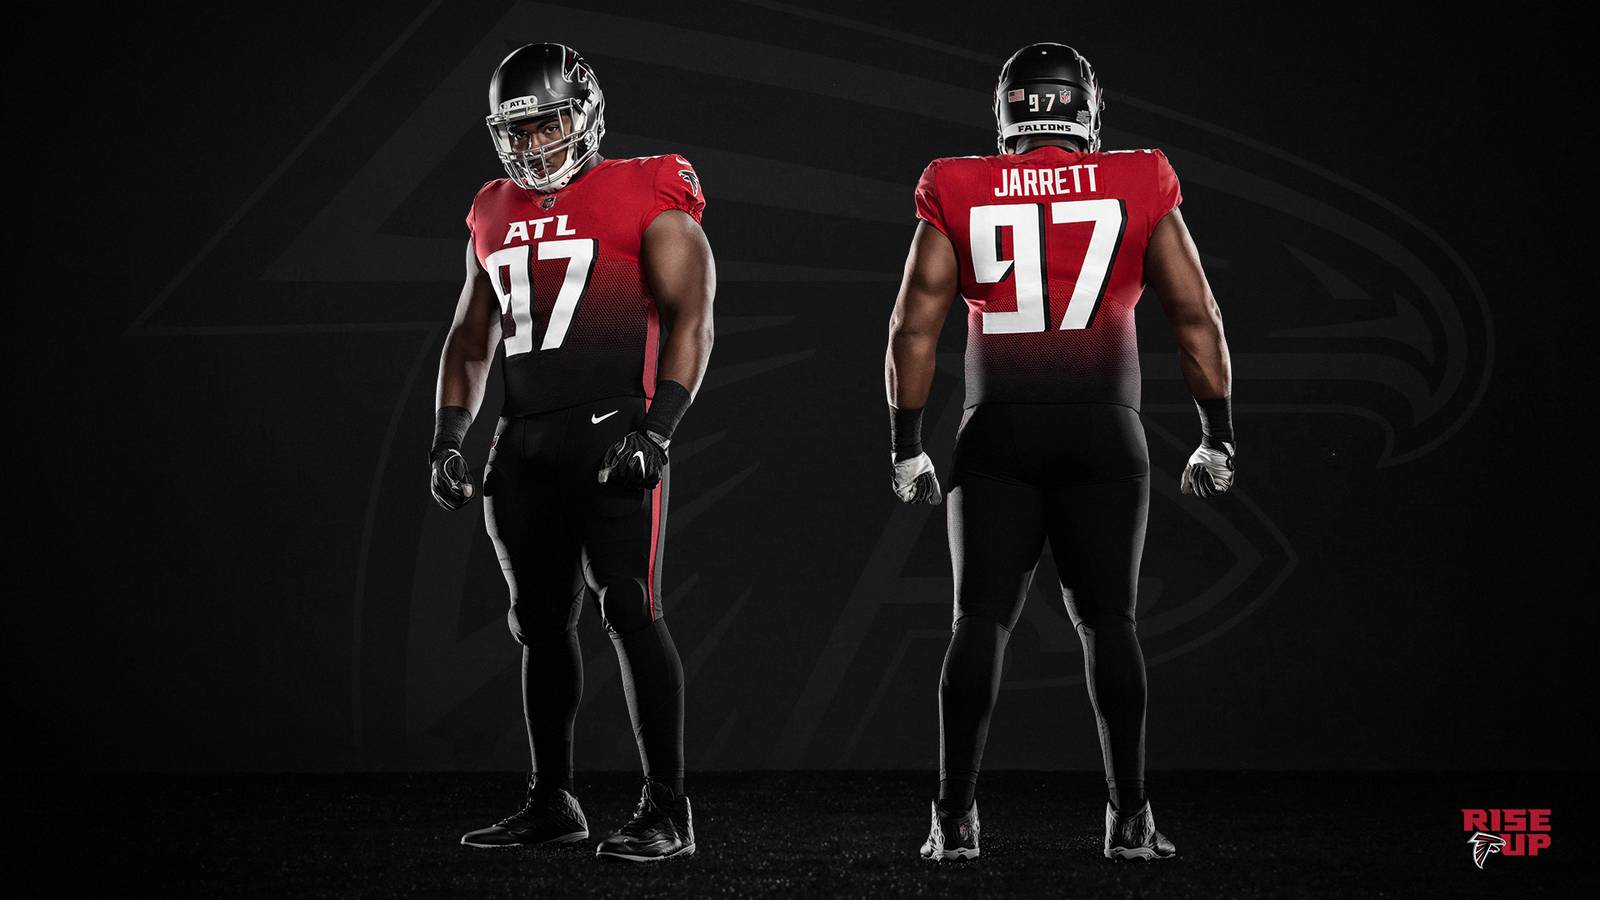 Falcons debut new uniforms for “Rise up and Vote” home game and